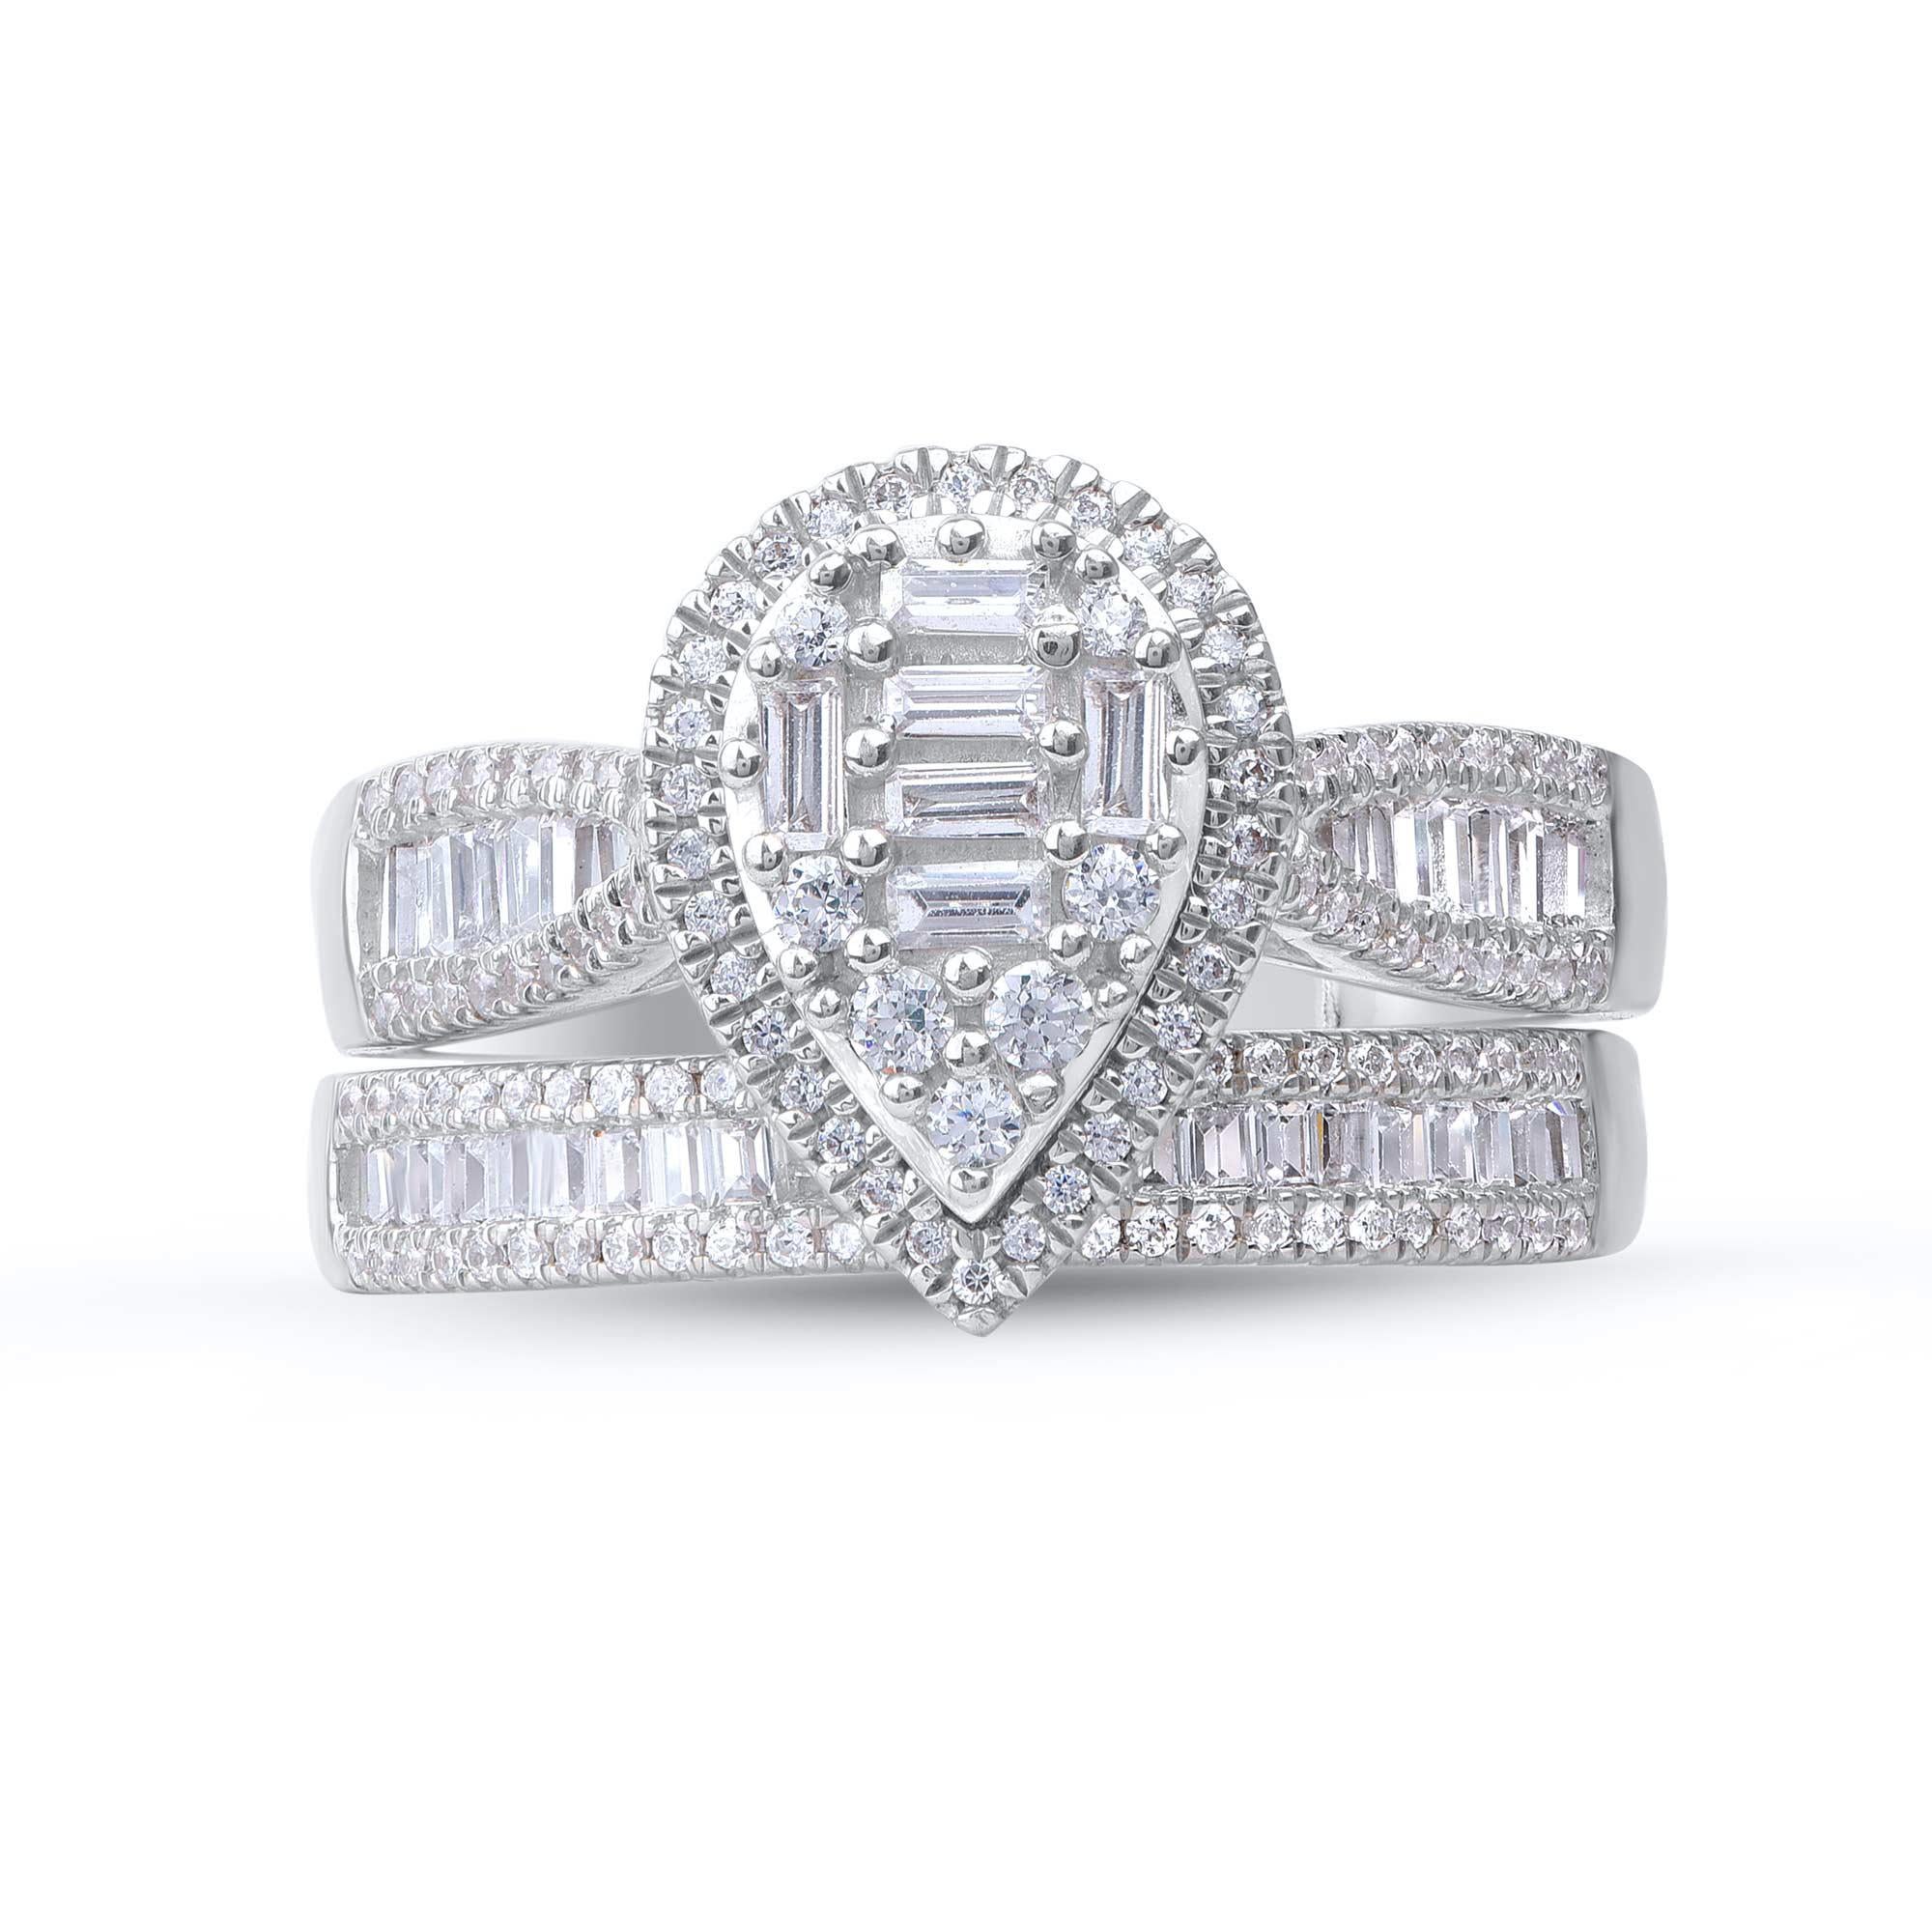 Express your love for her in the most classic way with this diamond ring set. Crafted in 14 Karat white gold. This wedding ring features a sparkling 174 brilliant cut and single cut round diamond and baguette cut diamonds beautifully set in prong